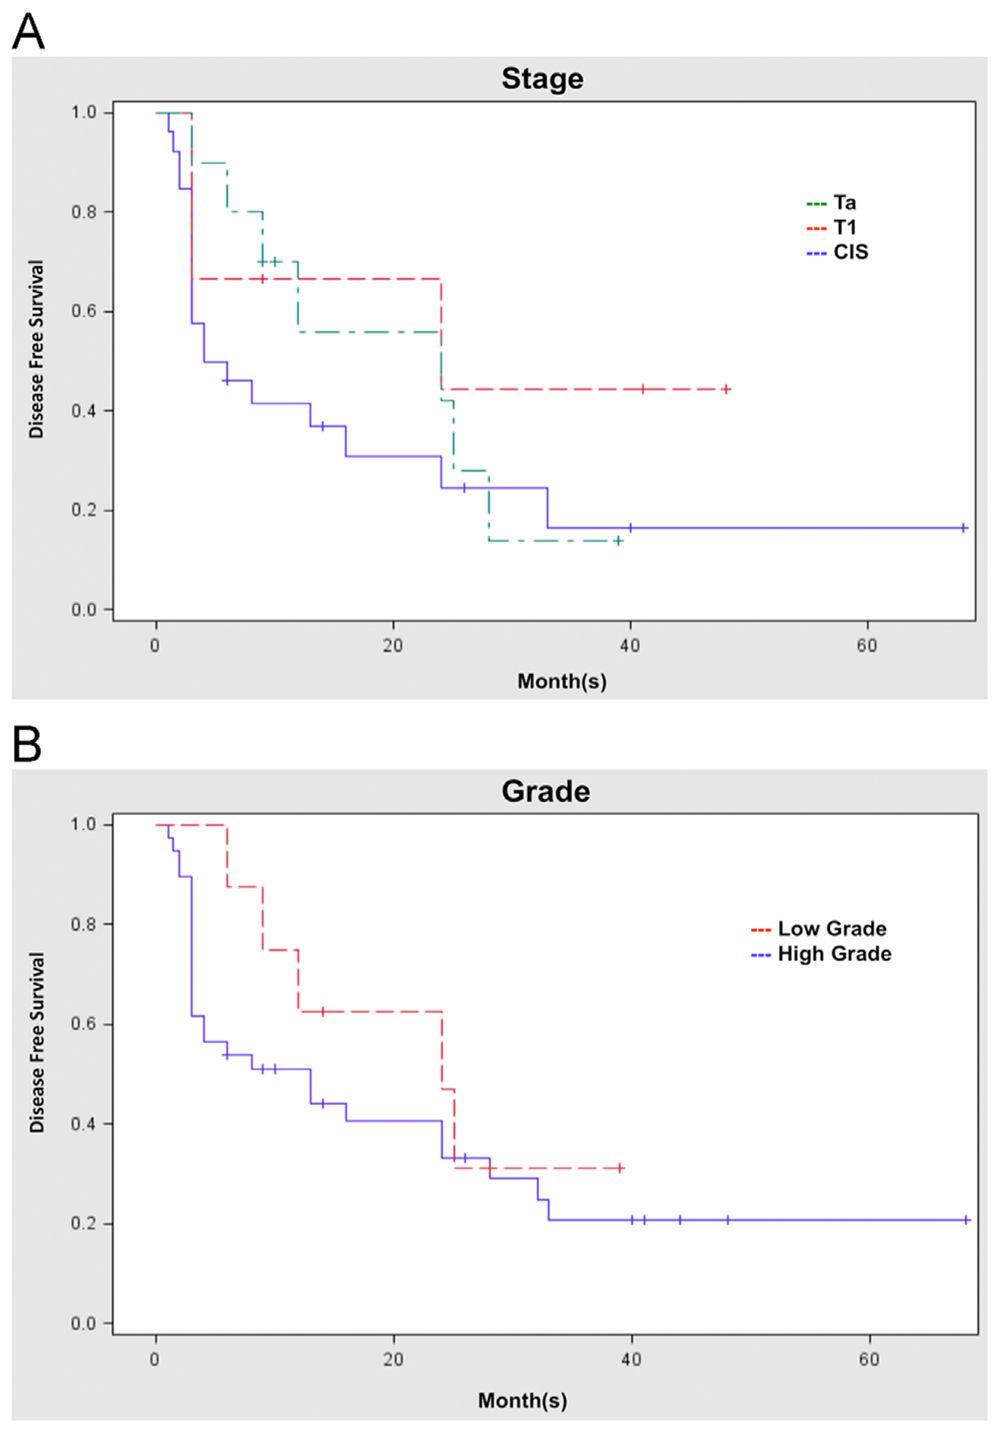 Lightfoot et al. Page 9 Fig. 2. Recurrence-free survival based on pathology. (A) RFS based on stage. CIS 58% CR, 38% 1-RFS, and 23% 2-RFS. Ta 90% CR, 50% 1-RFS, and 50% 2-RFS.